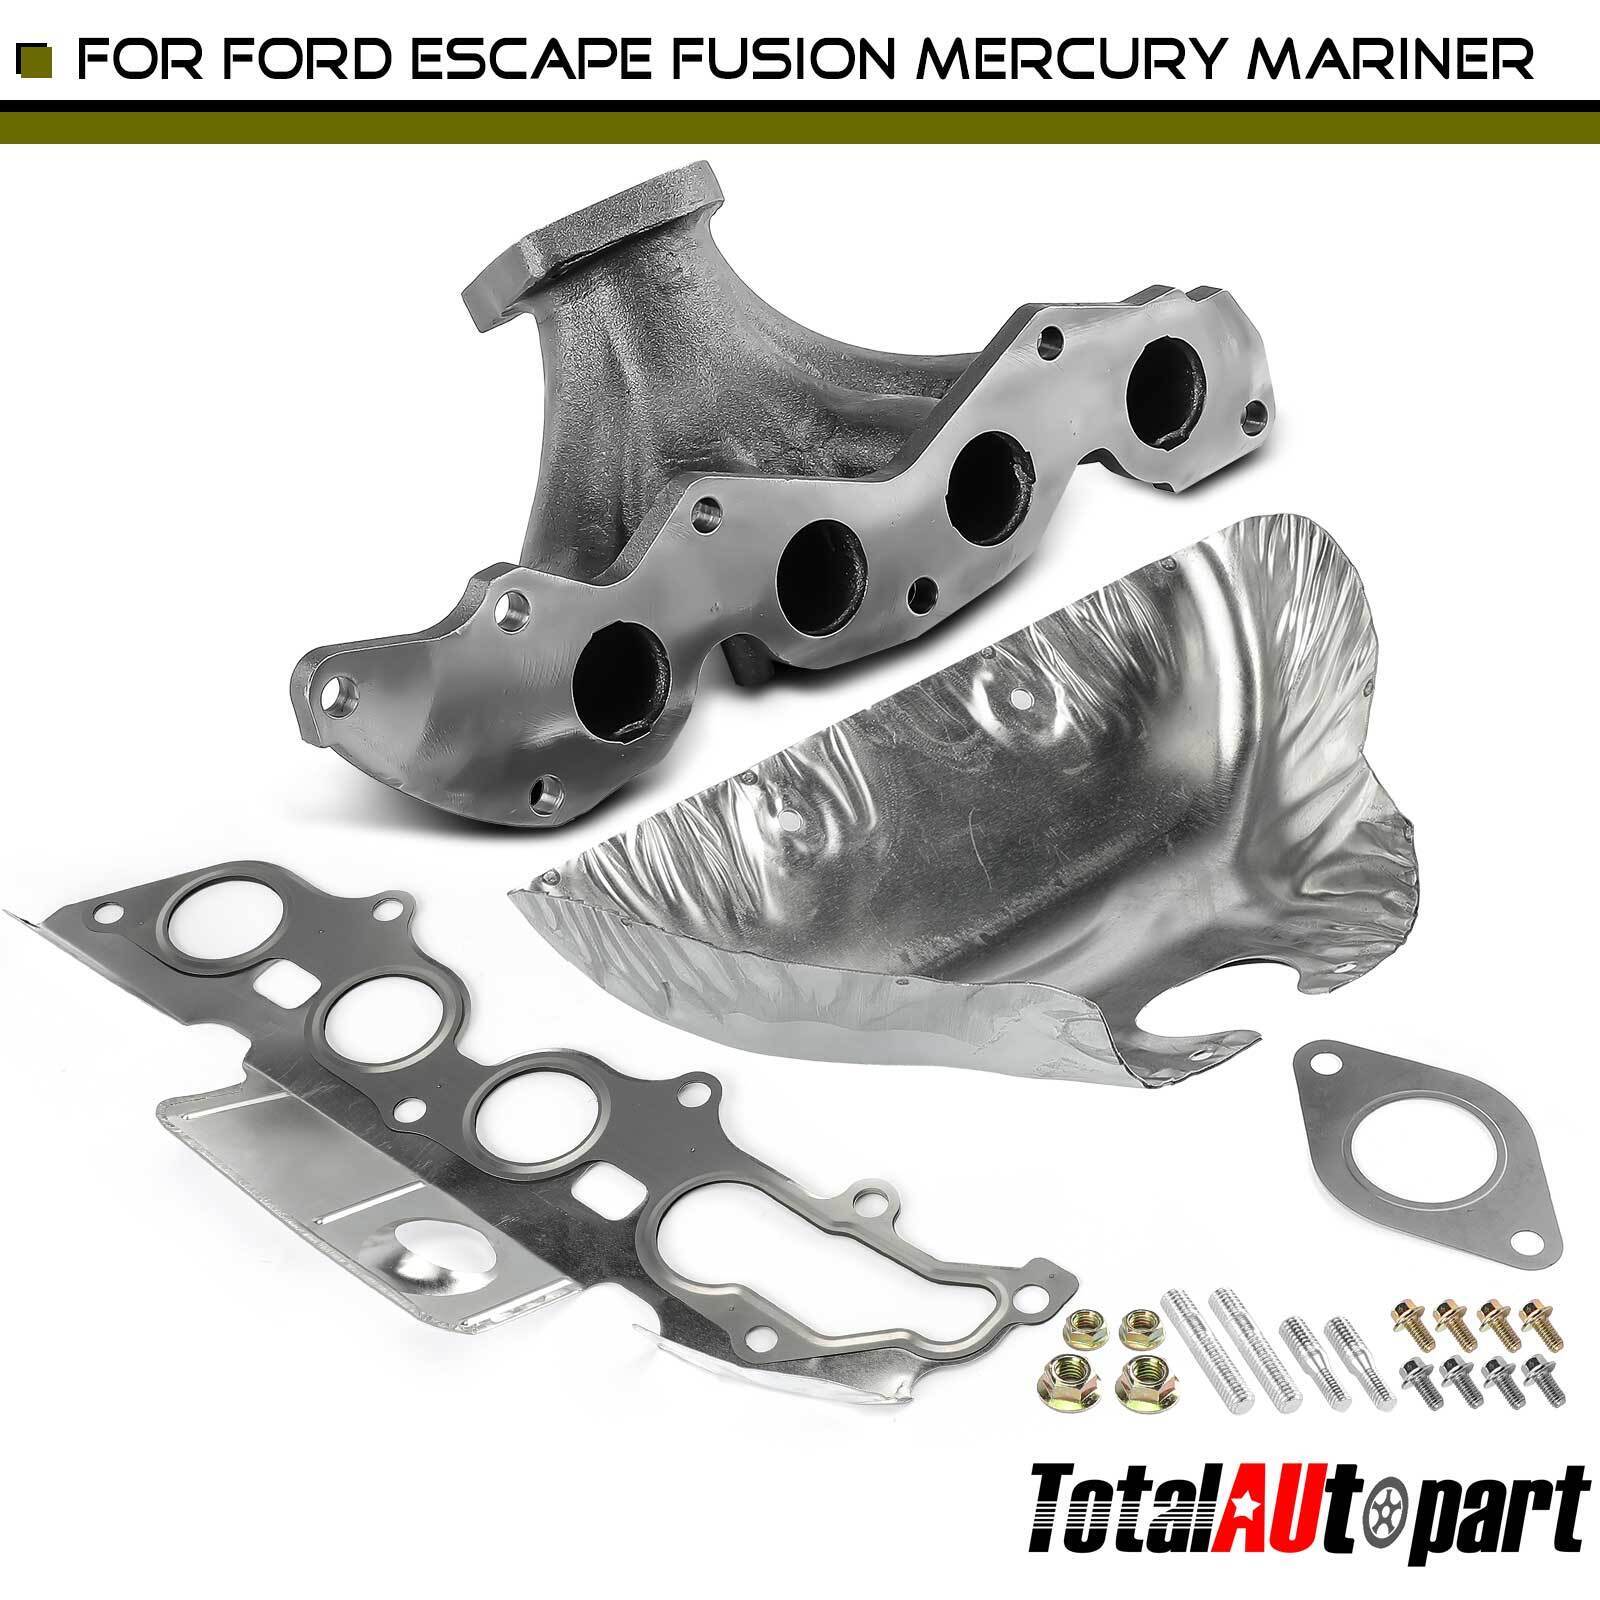 Exhaust Manifold w/ Gasket for Ford Escape Fusion Mercury Mariner Milan Front